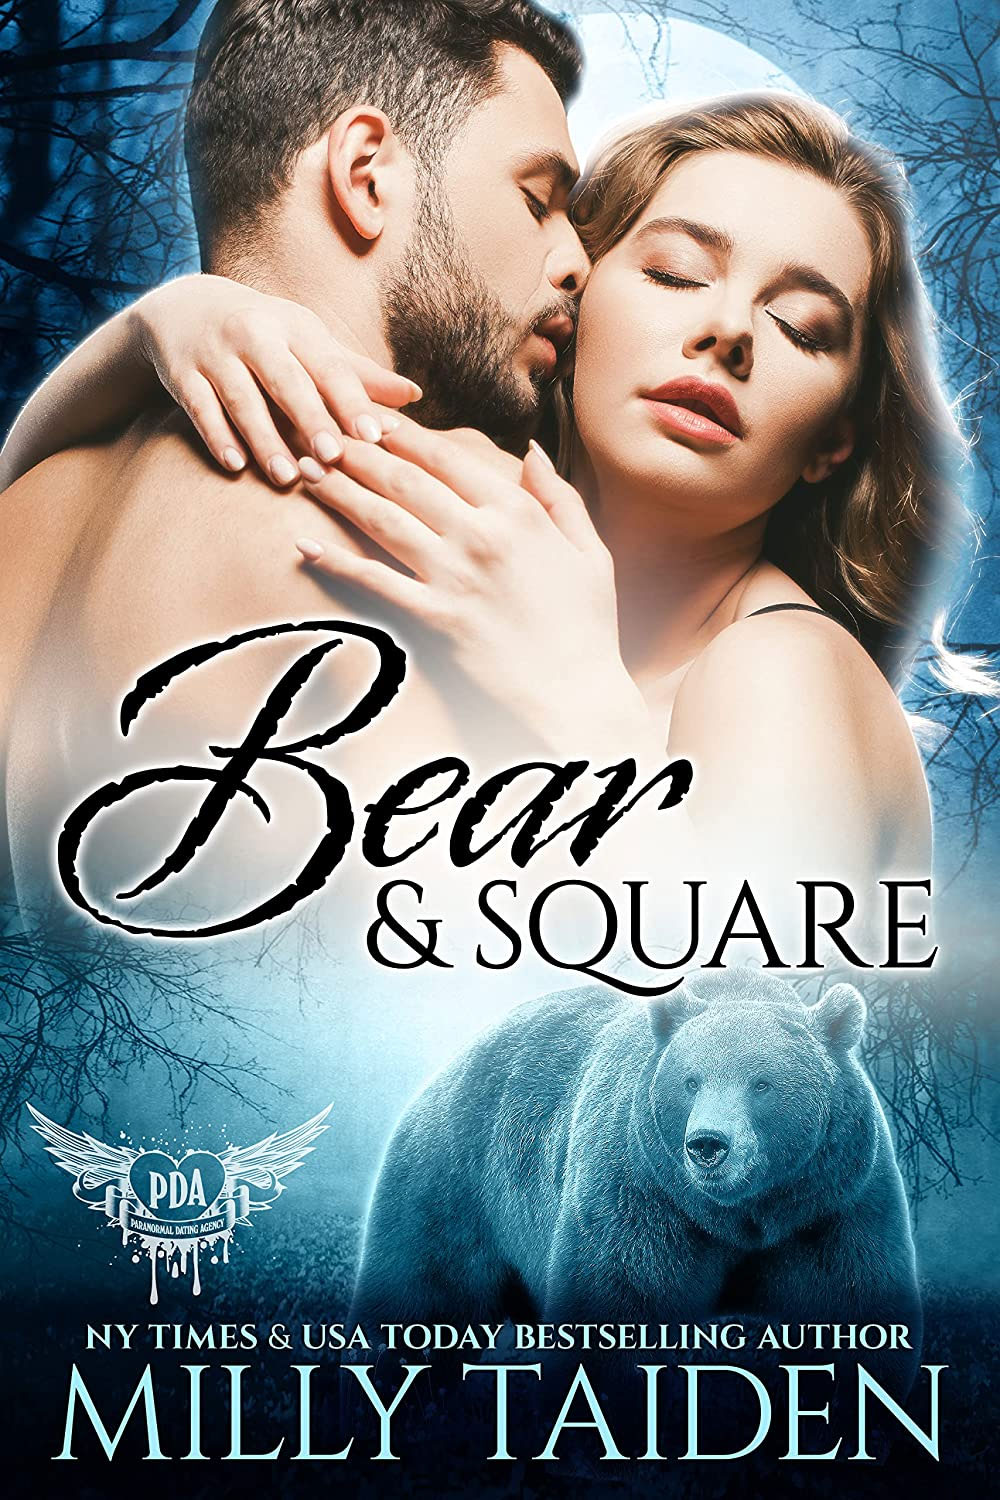 Bear and Square